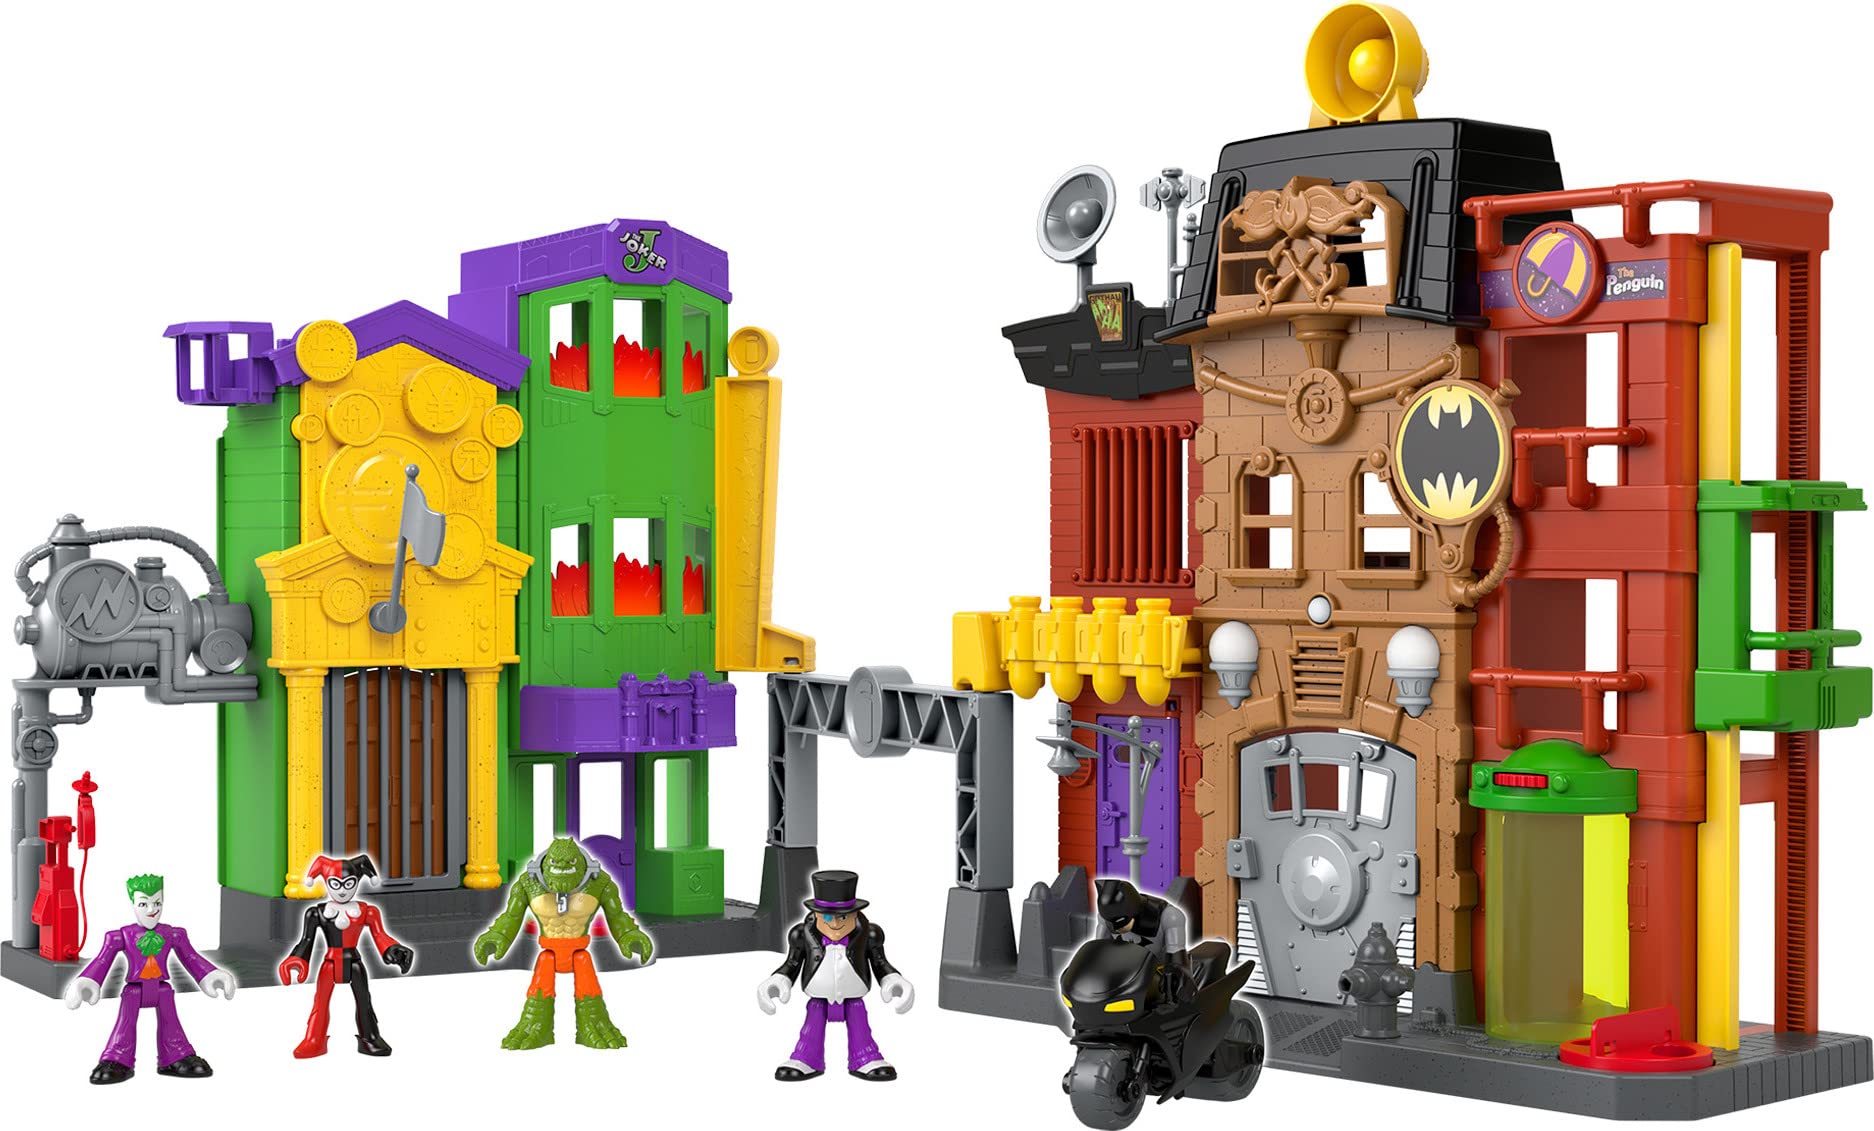 Fisher-Price Imaginext DC Super Friends Crime Alley Batman Playset w/ 5 Figures & Batcycle $30.49 + Free Shipping w/ Prime or on $35+